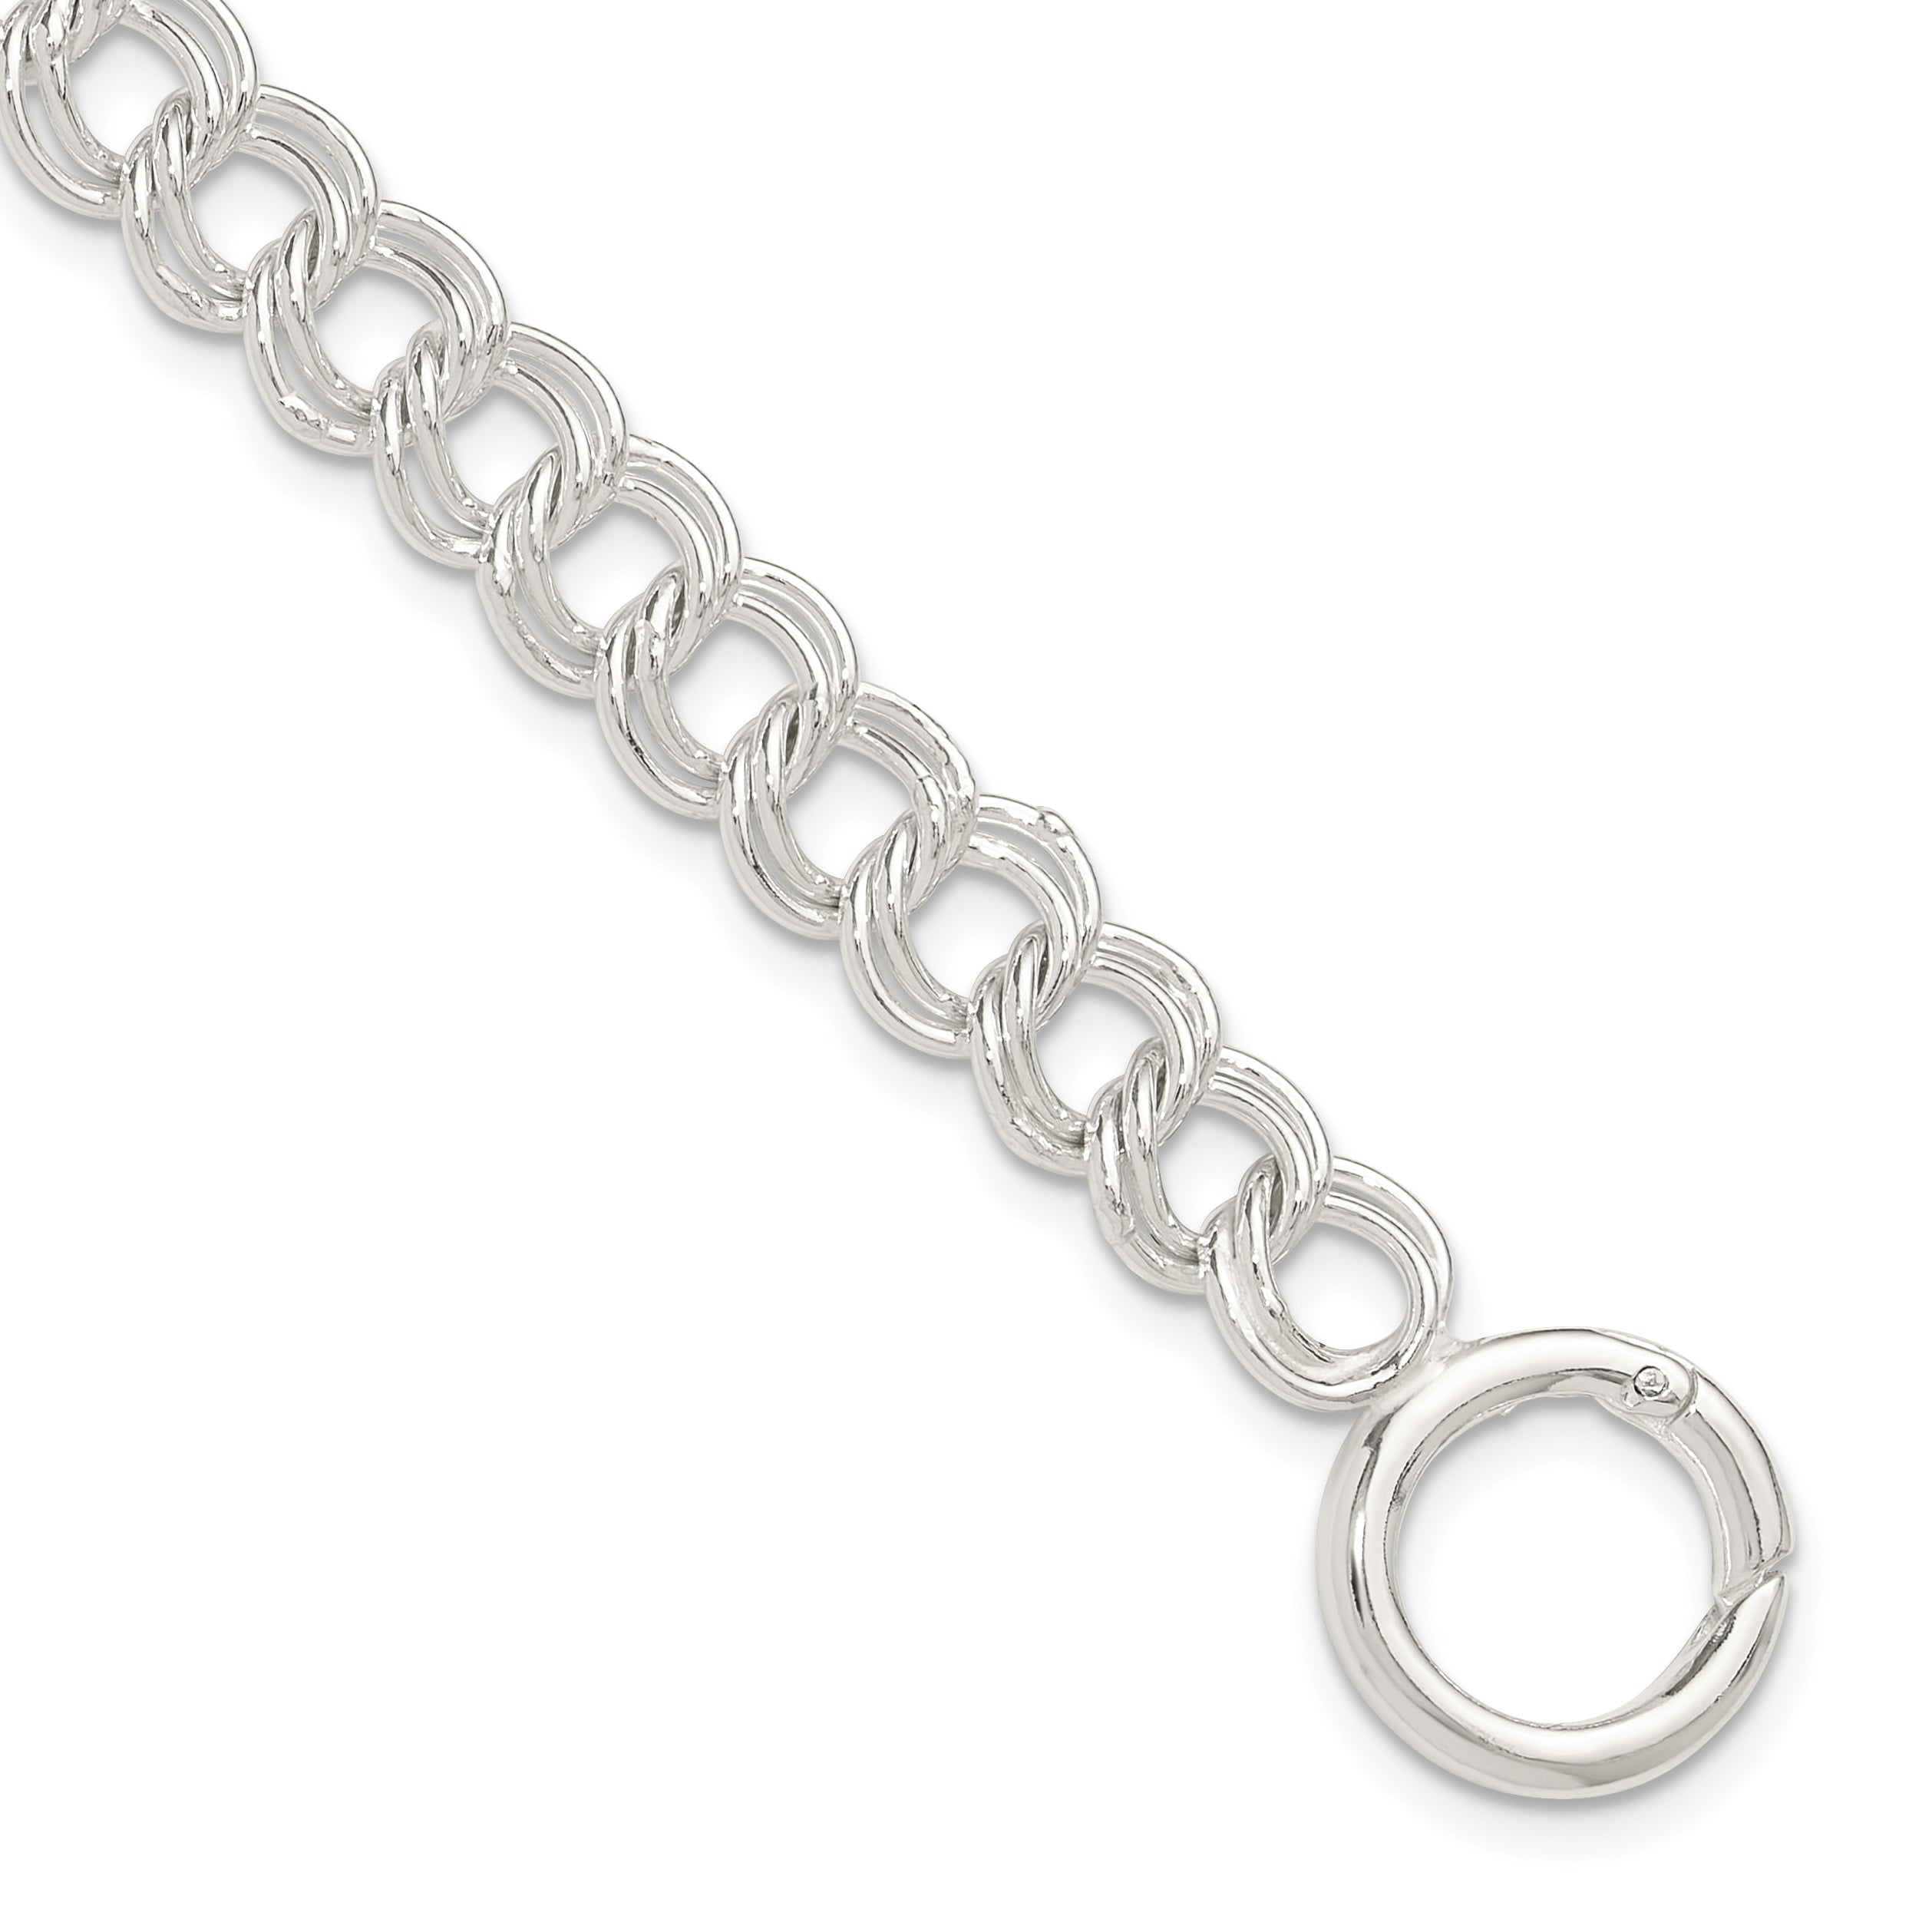 92.5 Oxidised Silver Flat Chain Type Bracelet - Silver Palace